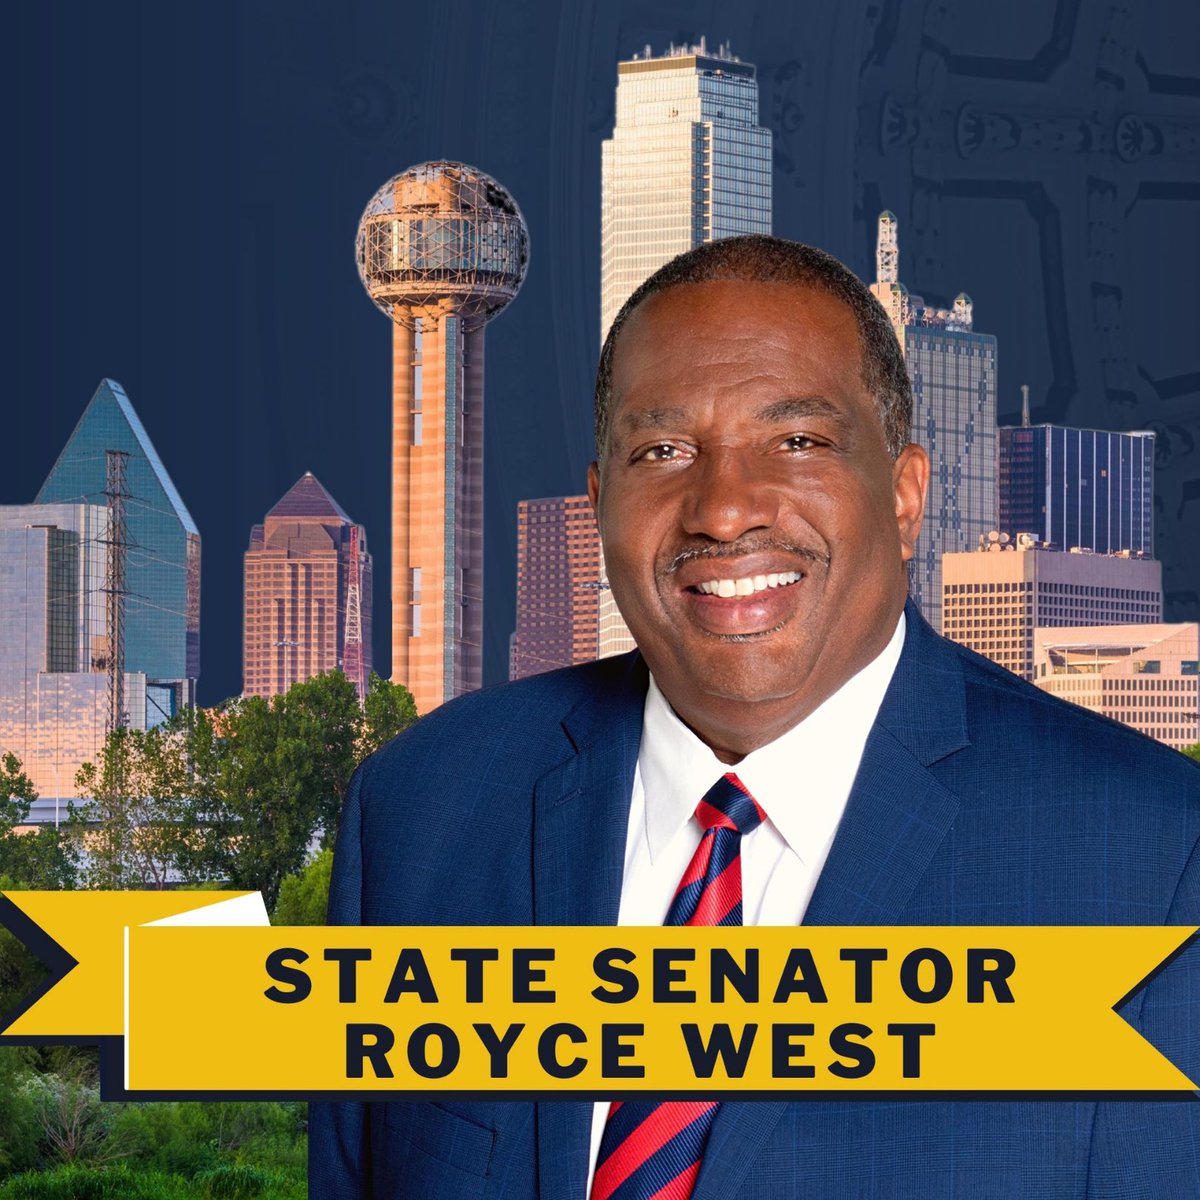 We have kicked off our campaign and look forward to continue to serve Senate District 23. If you want to join us, or to contribute to our our campaign visit our website our website. roycewest.com/volunteer